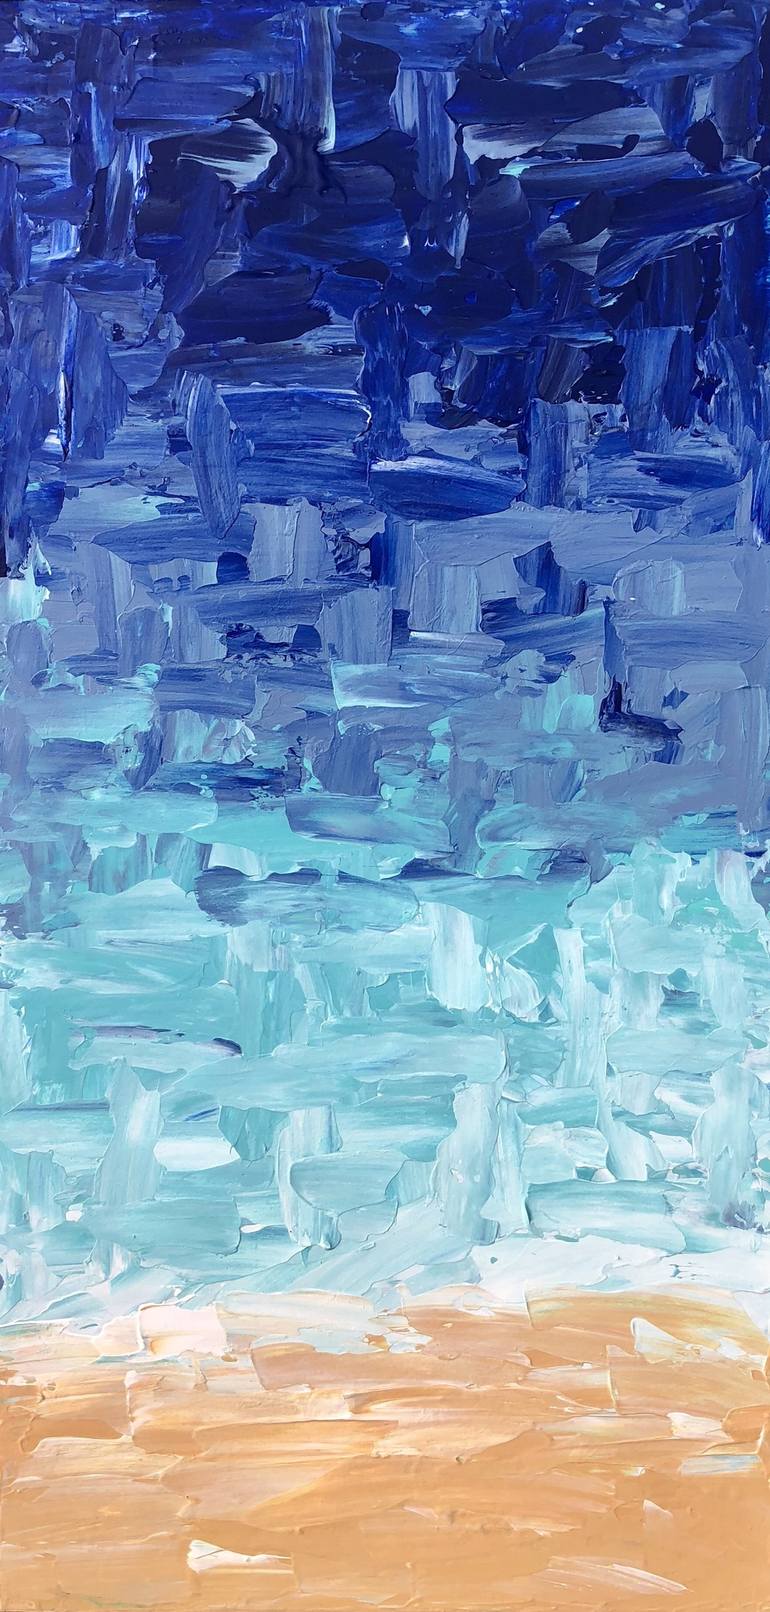 symphony-of-the-abstract-blue-ocean-waves-acrylic-painting-on-canvas